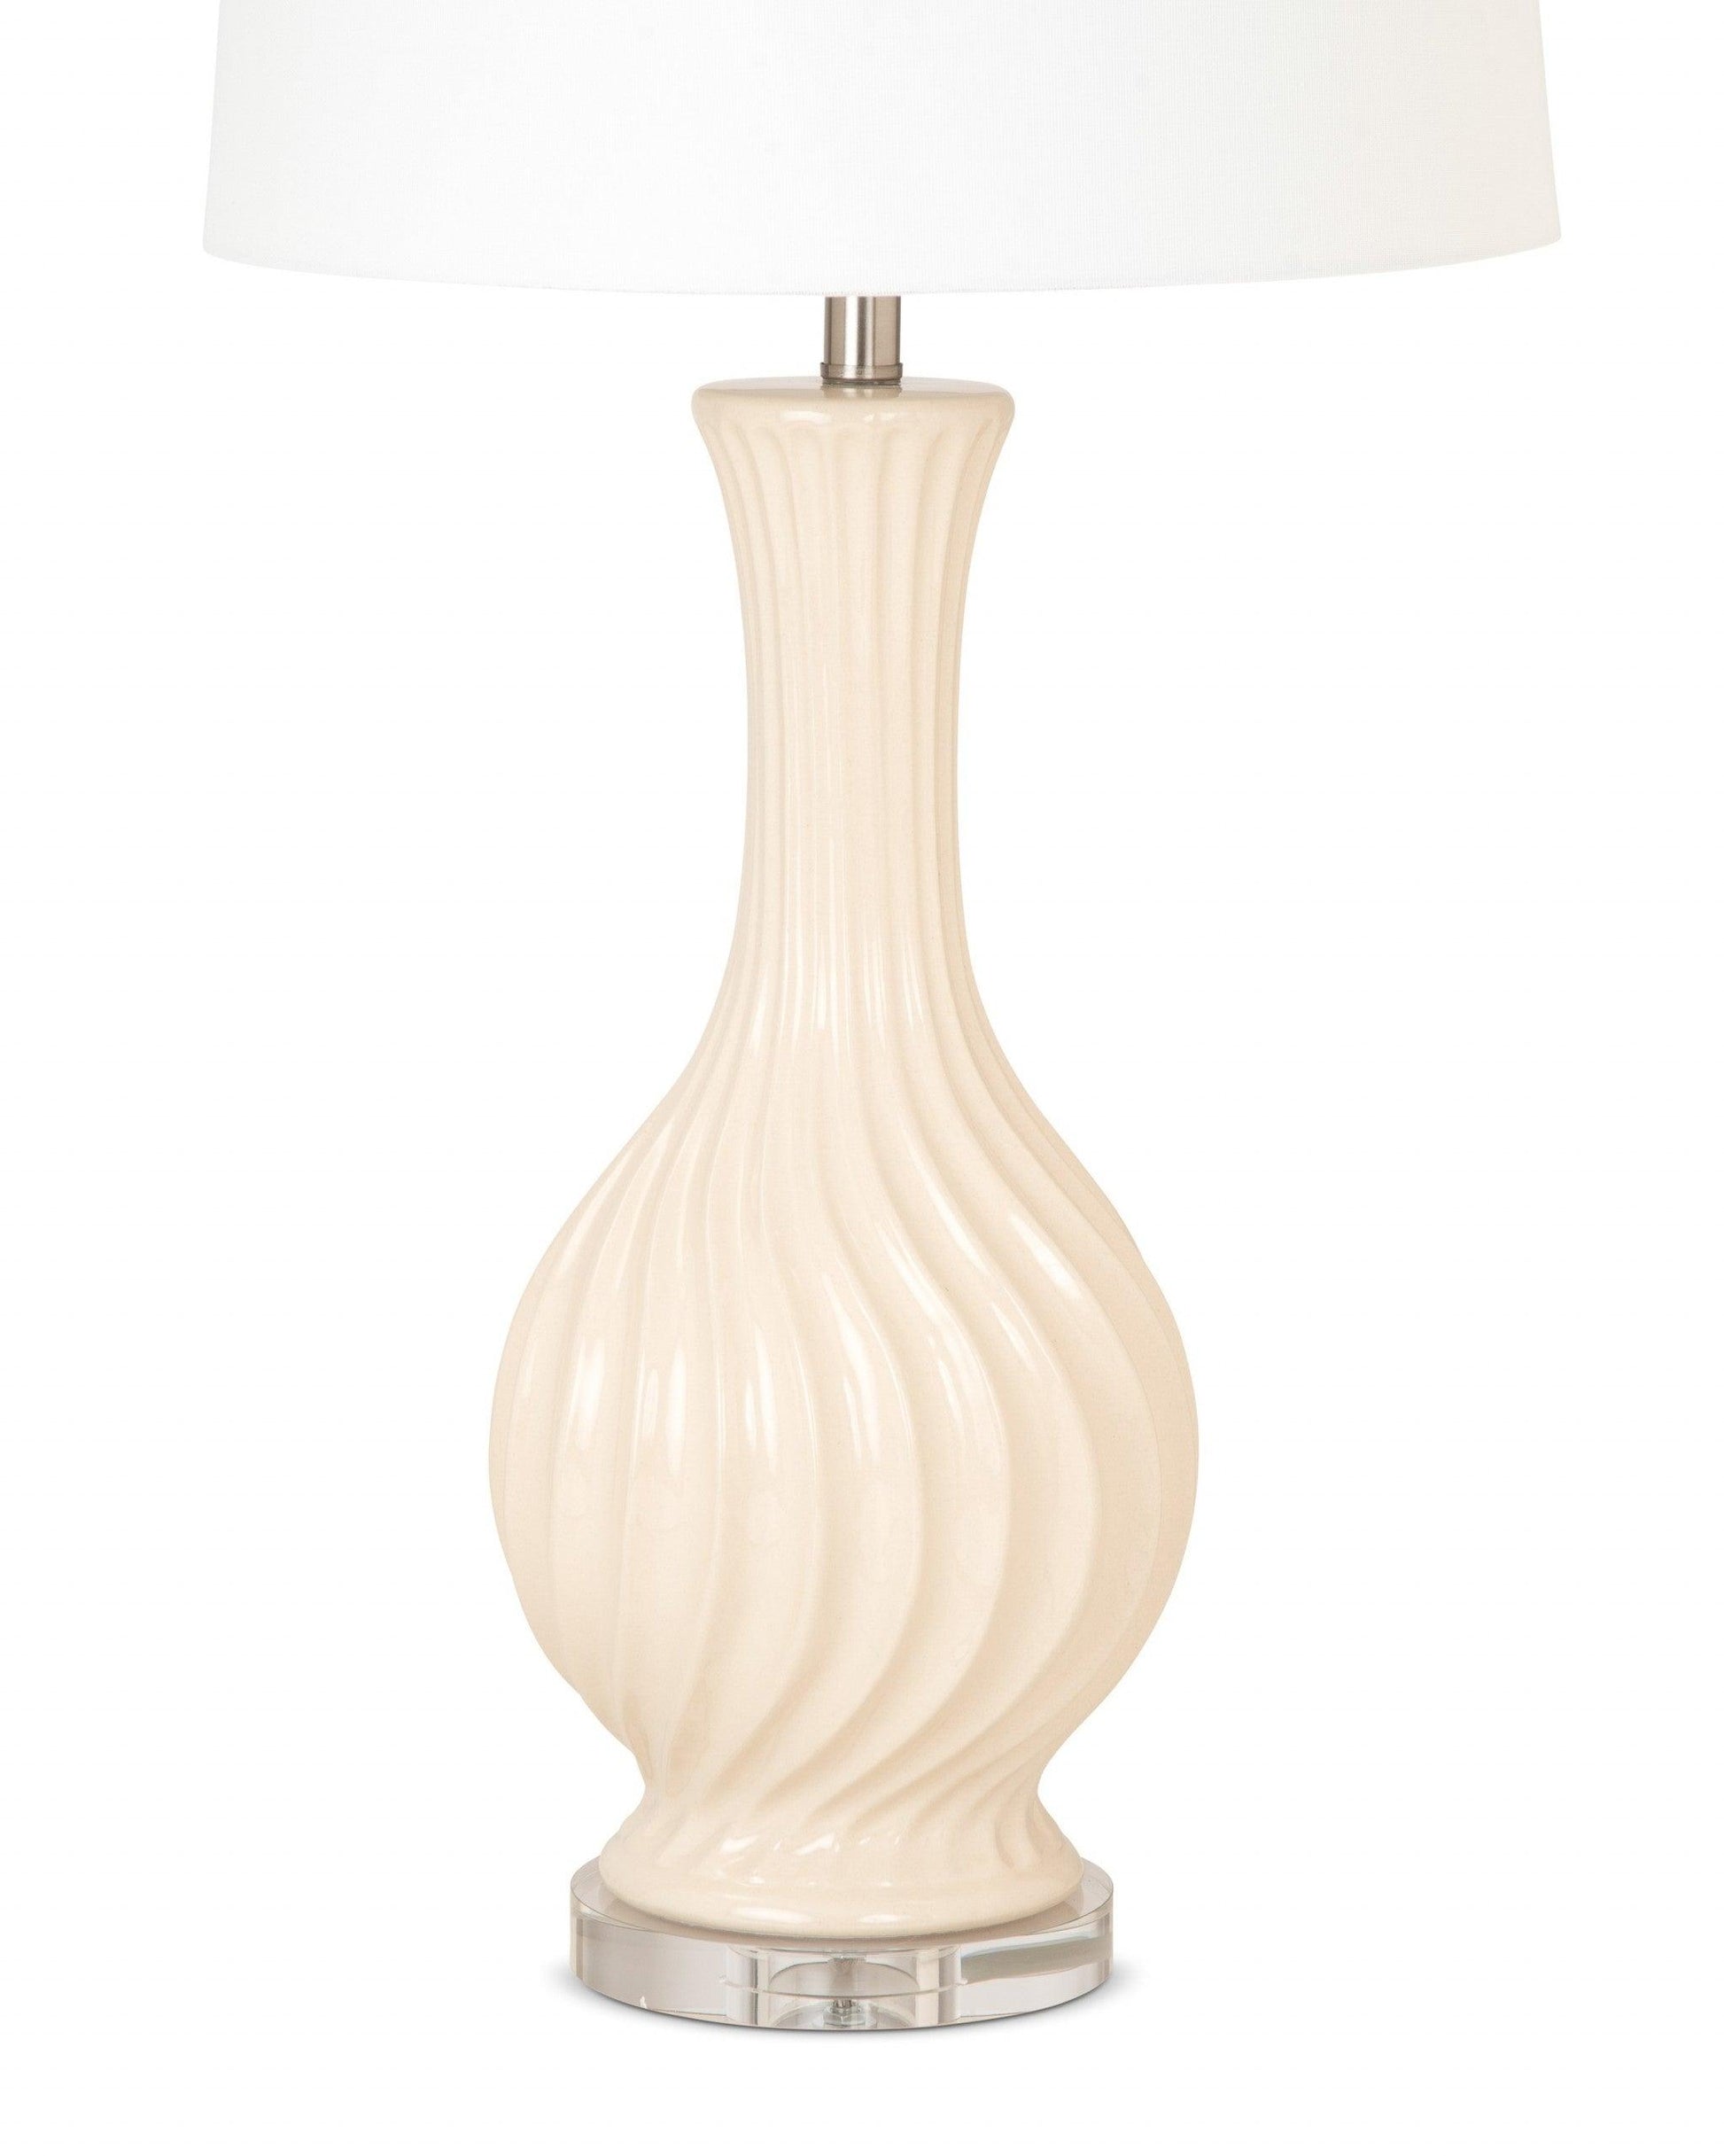 Set of 2 Beige Curved Ceramic Table Lamps - AFS